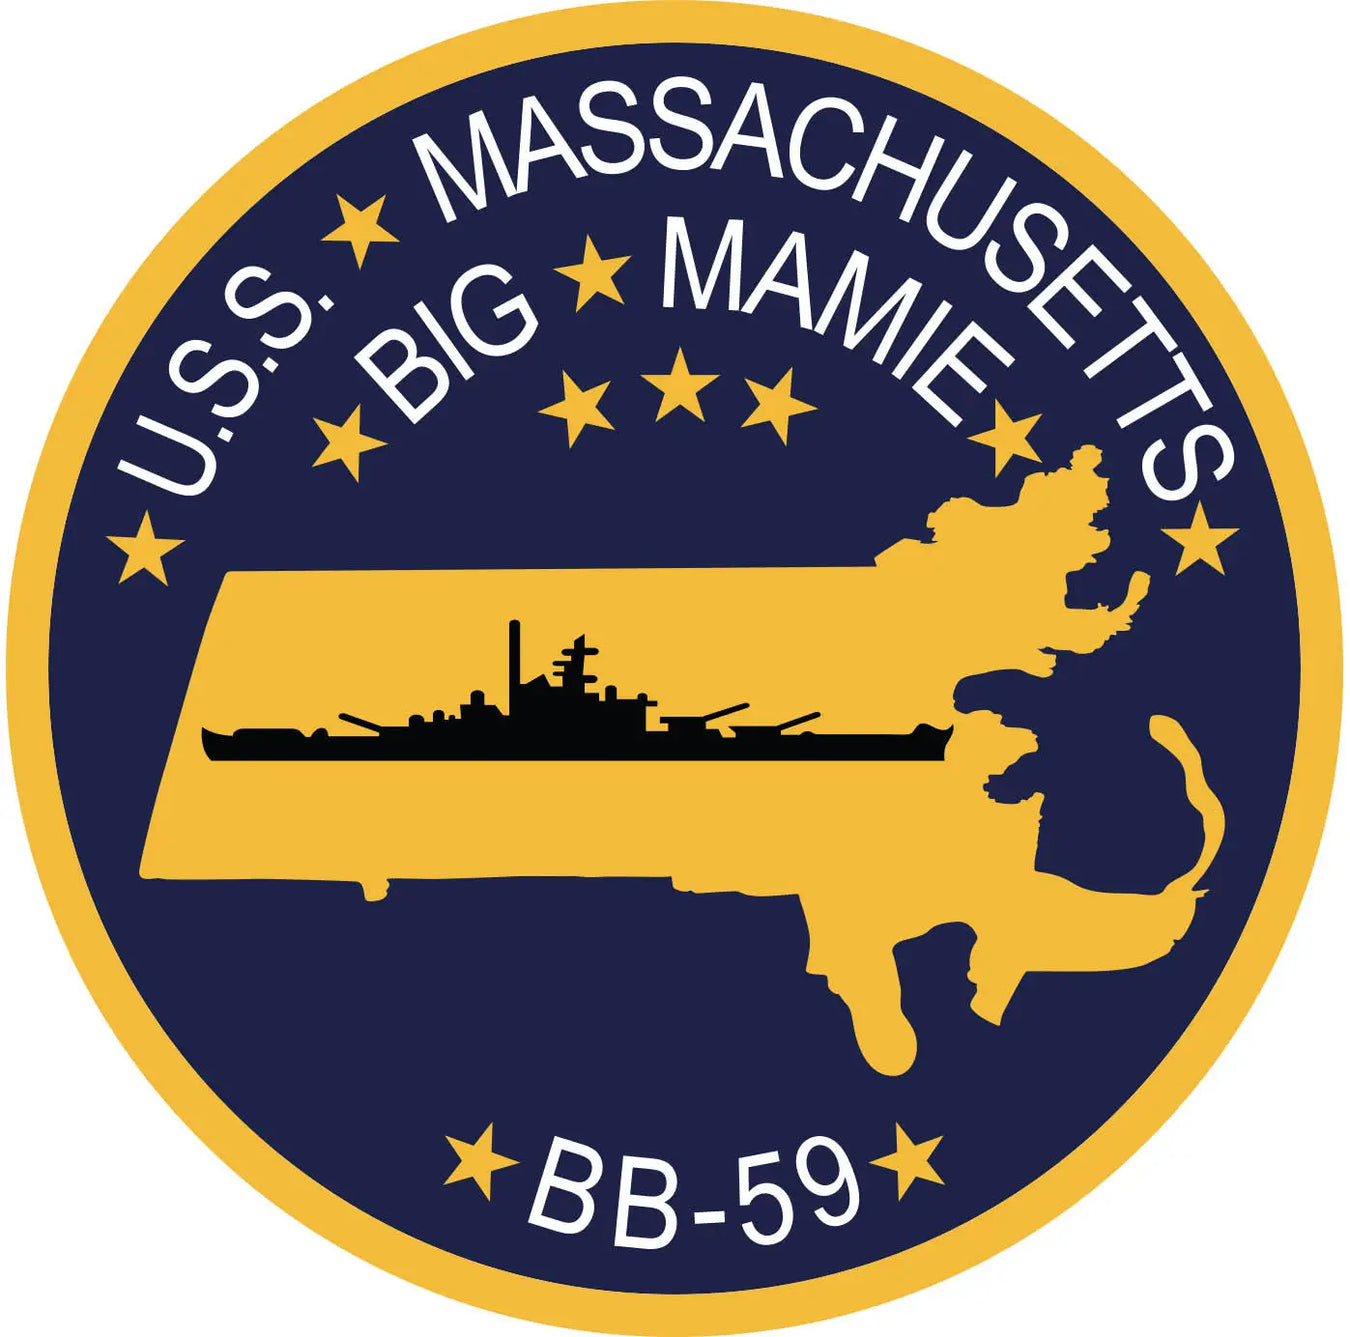 USS Massachusetts (BB-59) Merchandise - Shop T-Shirts, hoodies, patches, pins, flags, decals, hats and more.